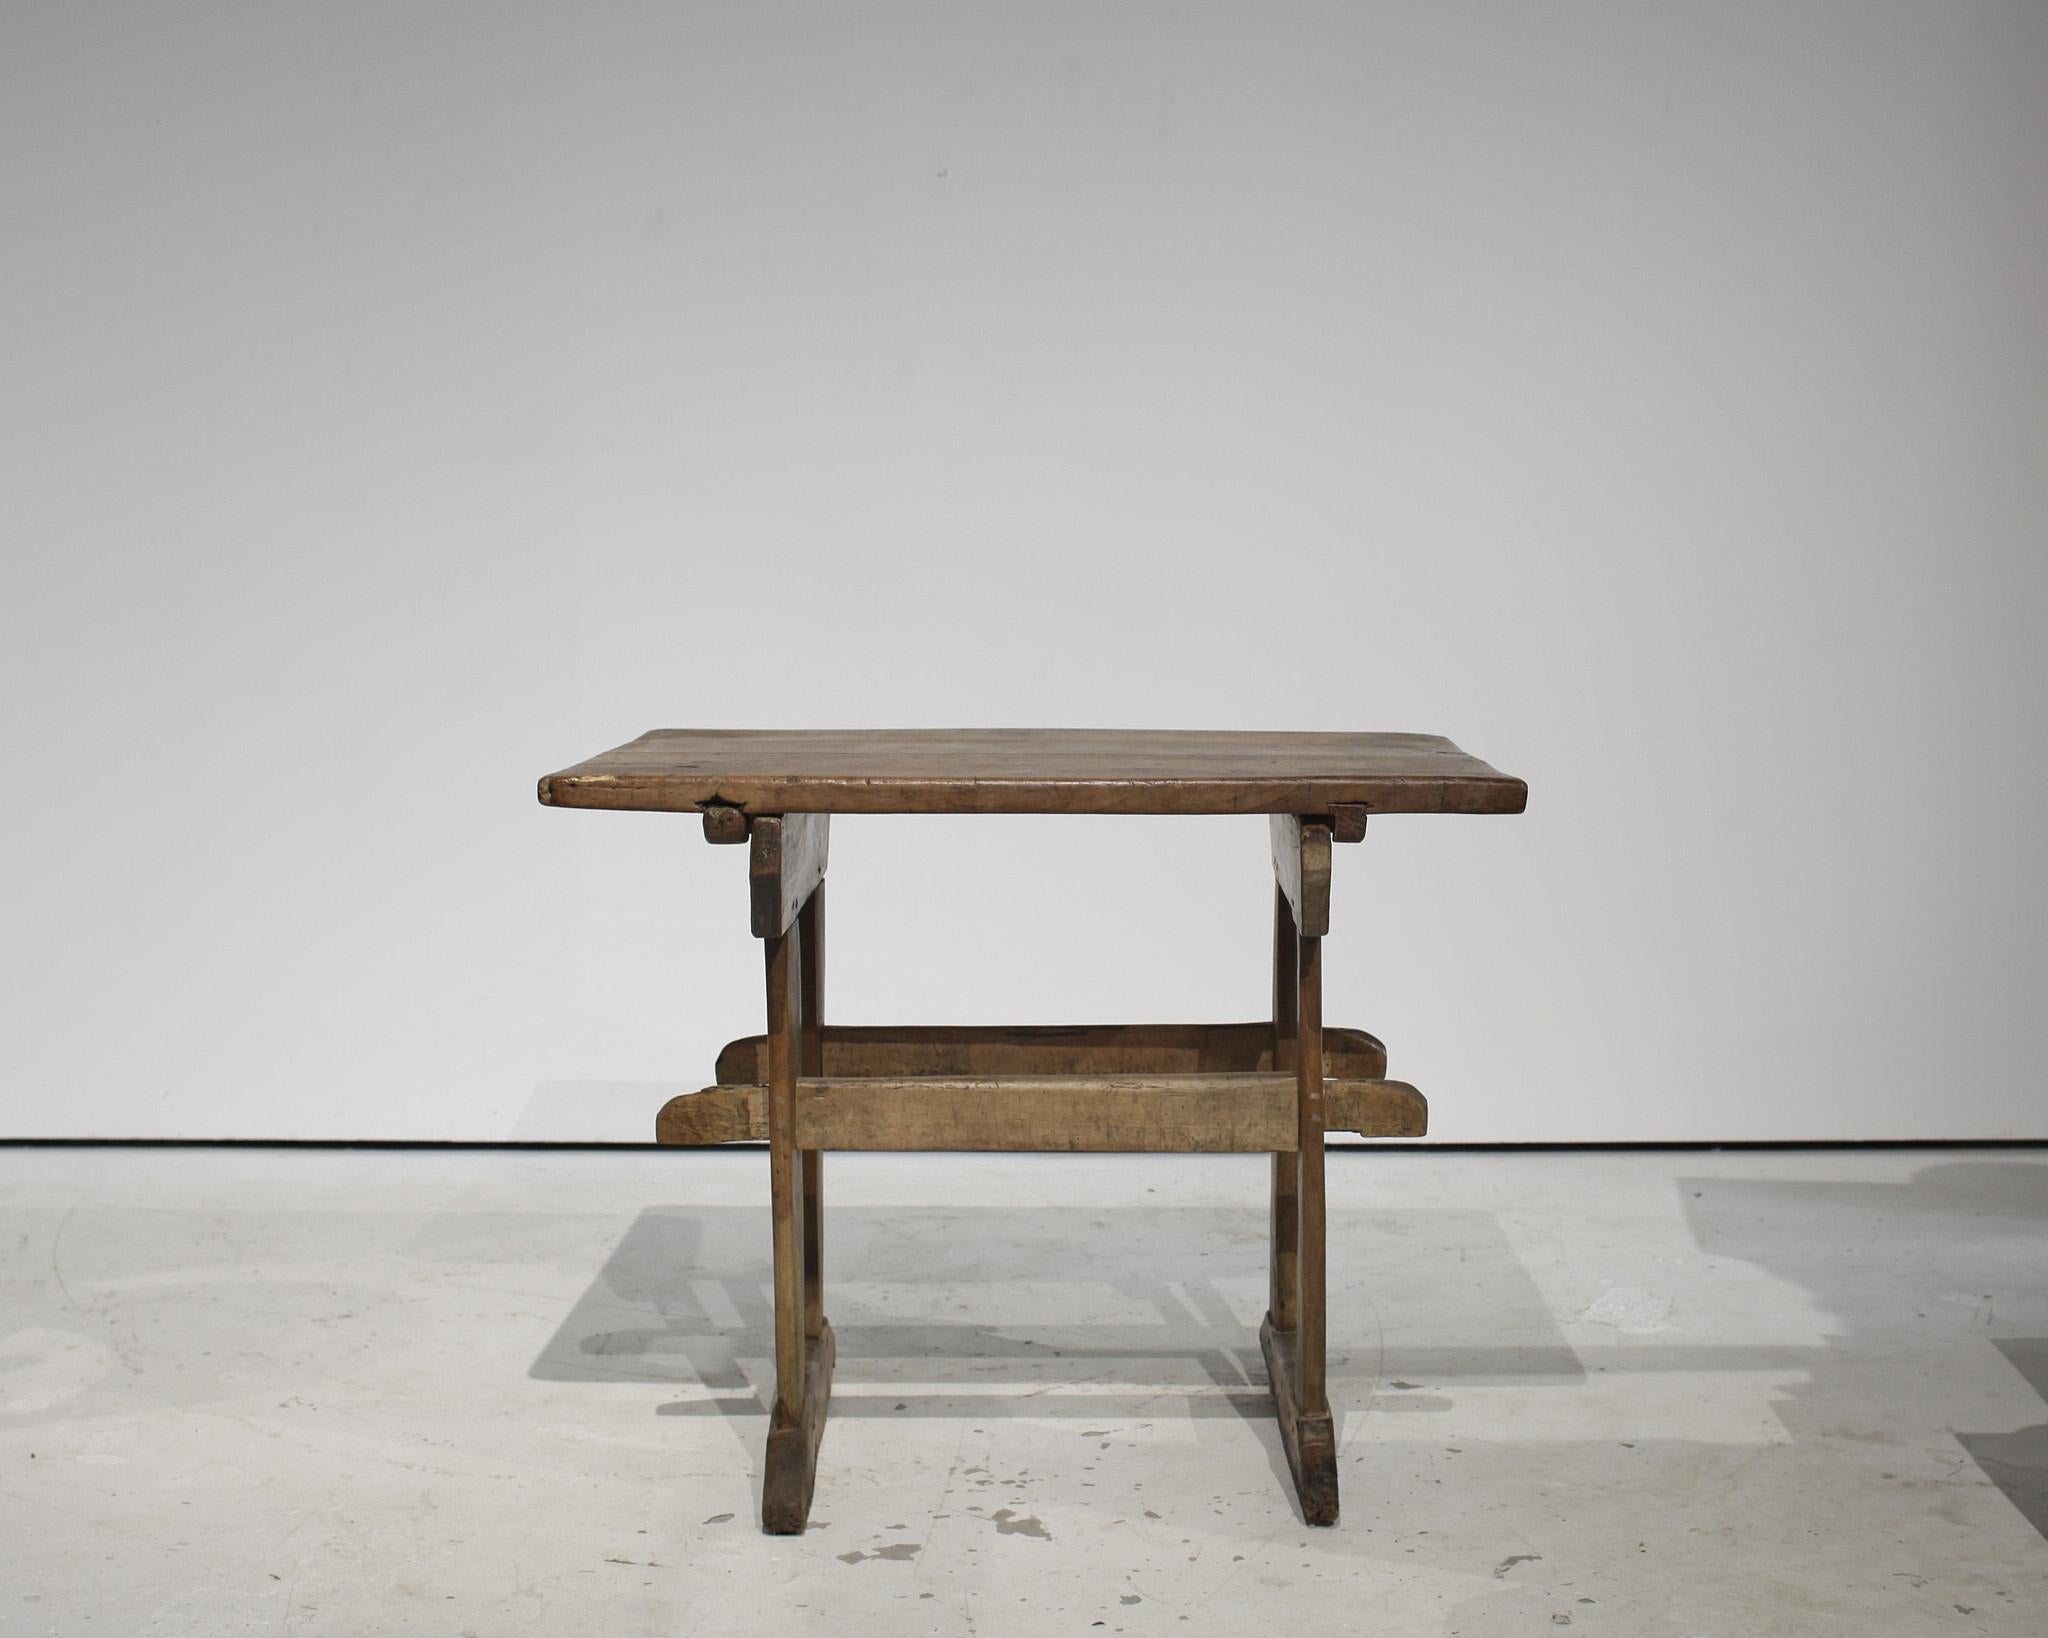 A rare walnut and elm table from the Andorran Pyrenees.

Unusual strong utilitarian design.